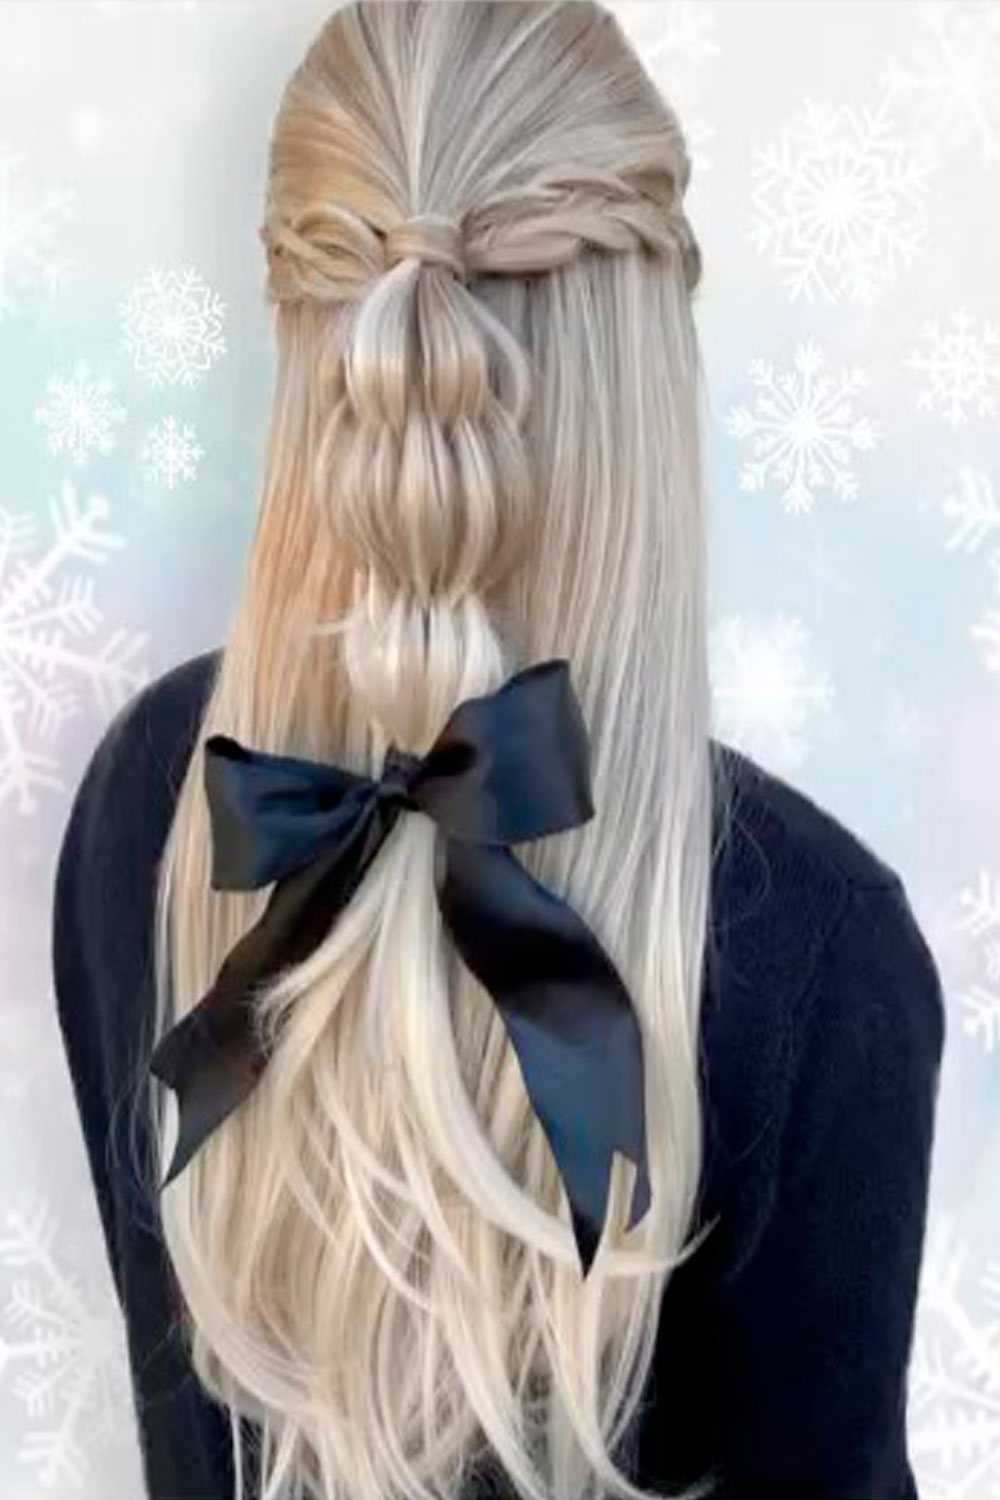 Romantic  Hairstyles With Black Ribbon